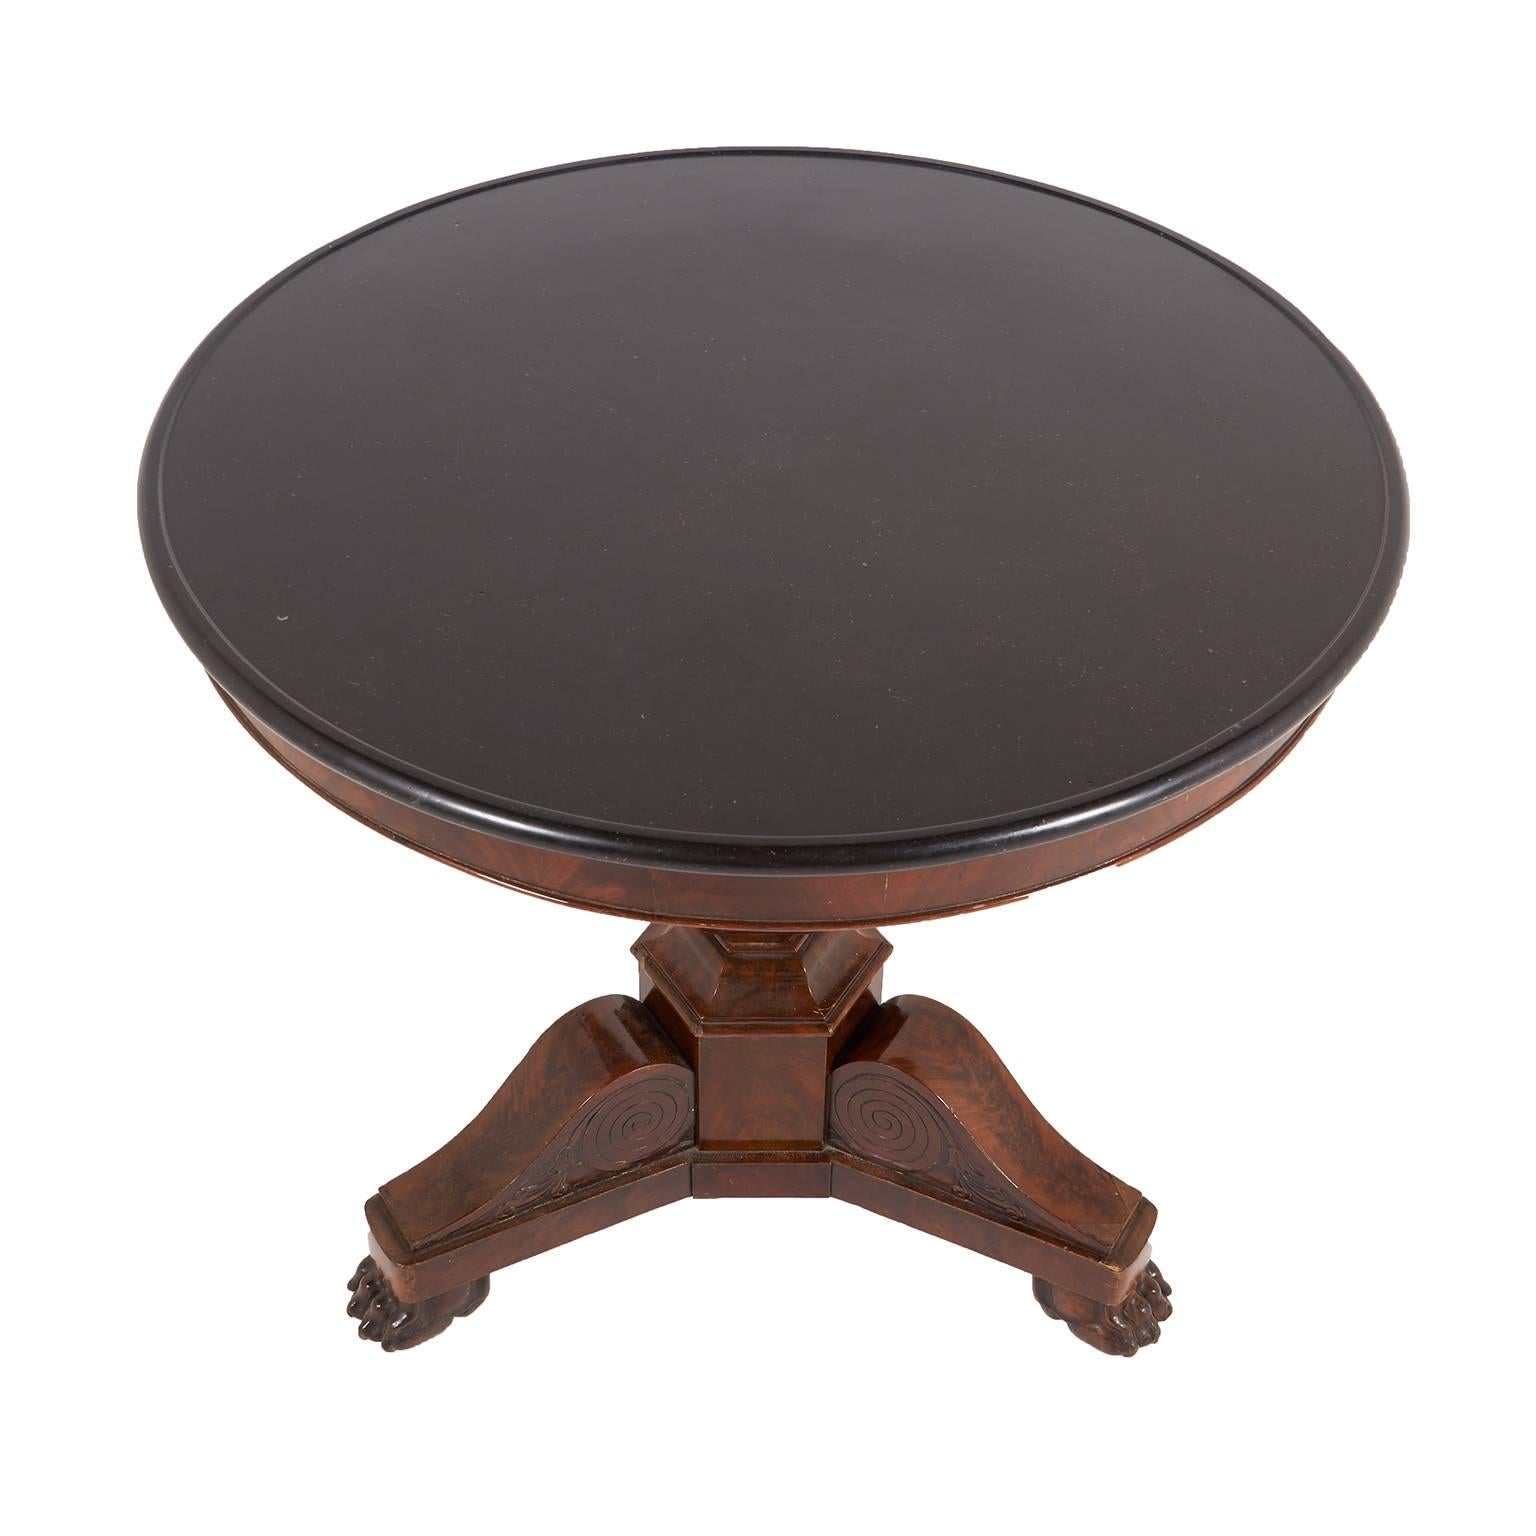 Lovely smaller French 19th Century gueridon from Paris. Black slate top.


